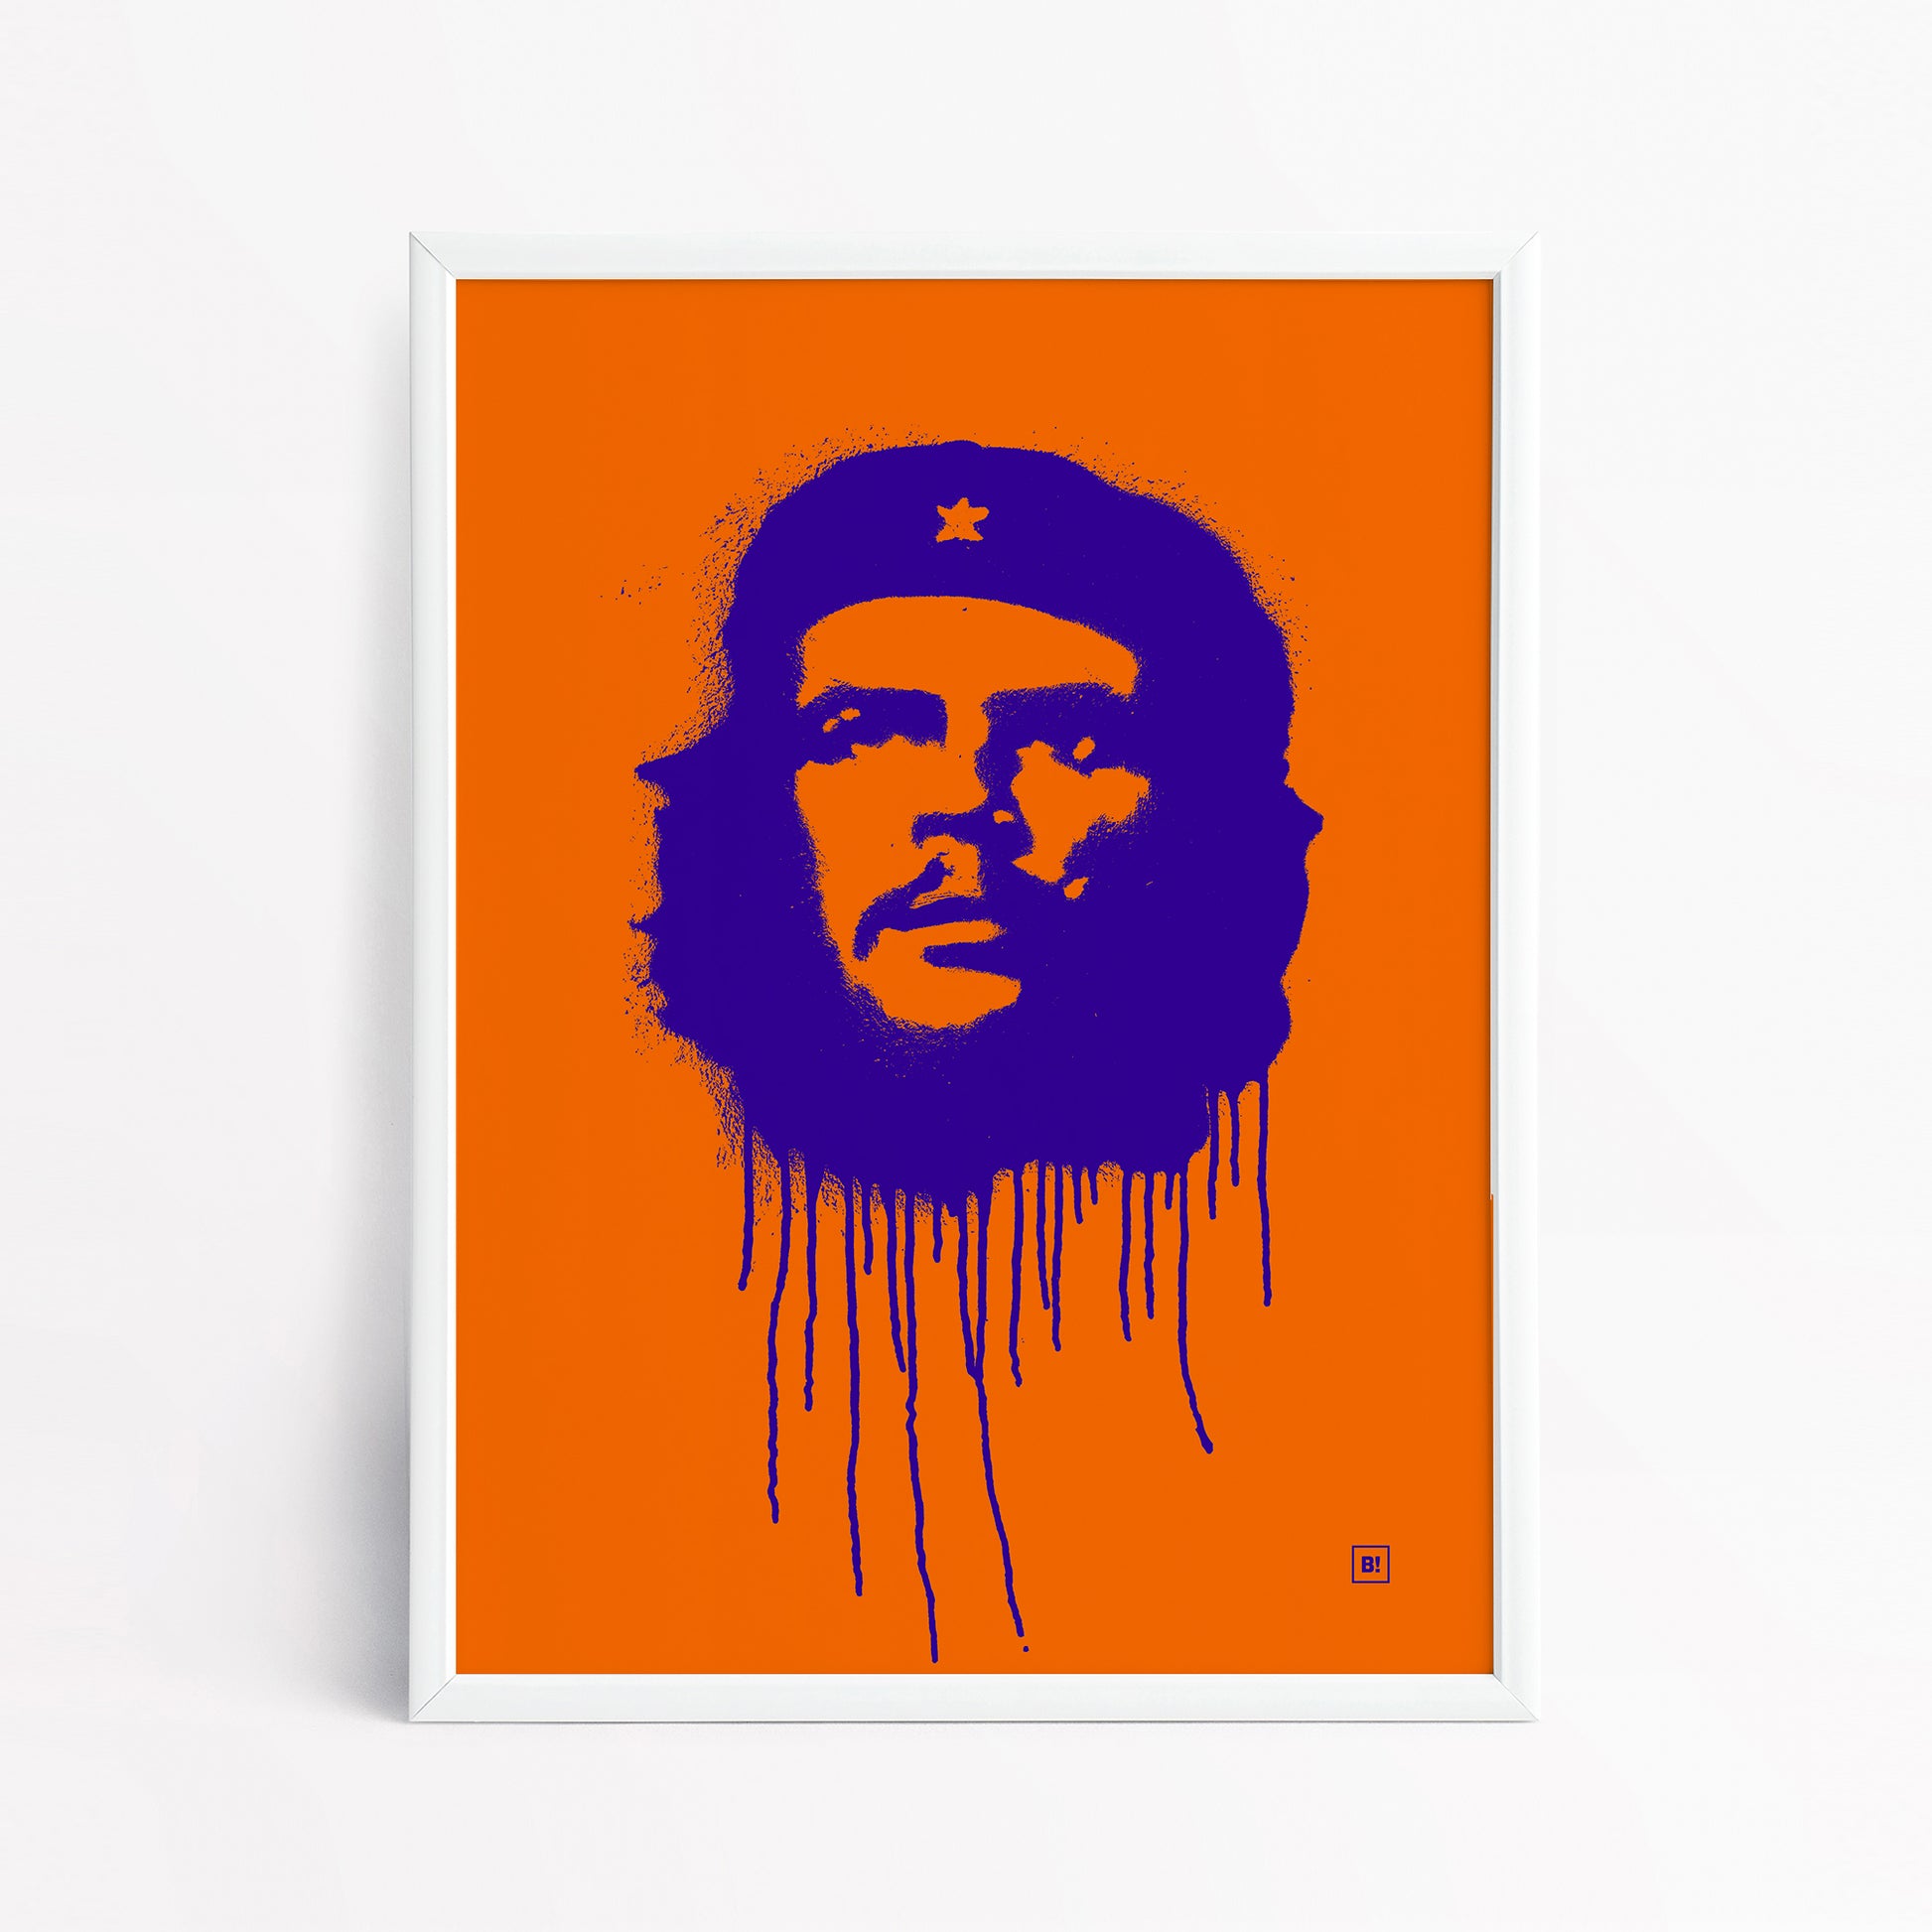 Be inspired by our pop navy "Ernesto Che Guevara" art print! This artwork has been printed using the giclée process on archival acid-free paper and is presented in a sleek white frame, showcasing its timeless beauty in every detail.